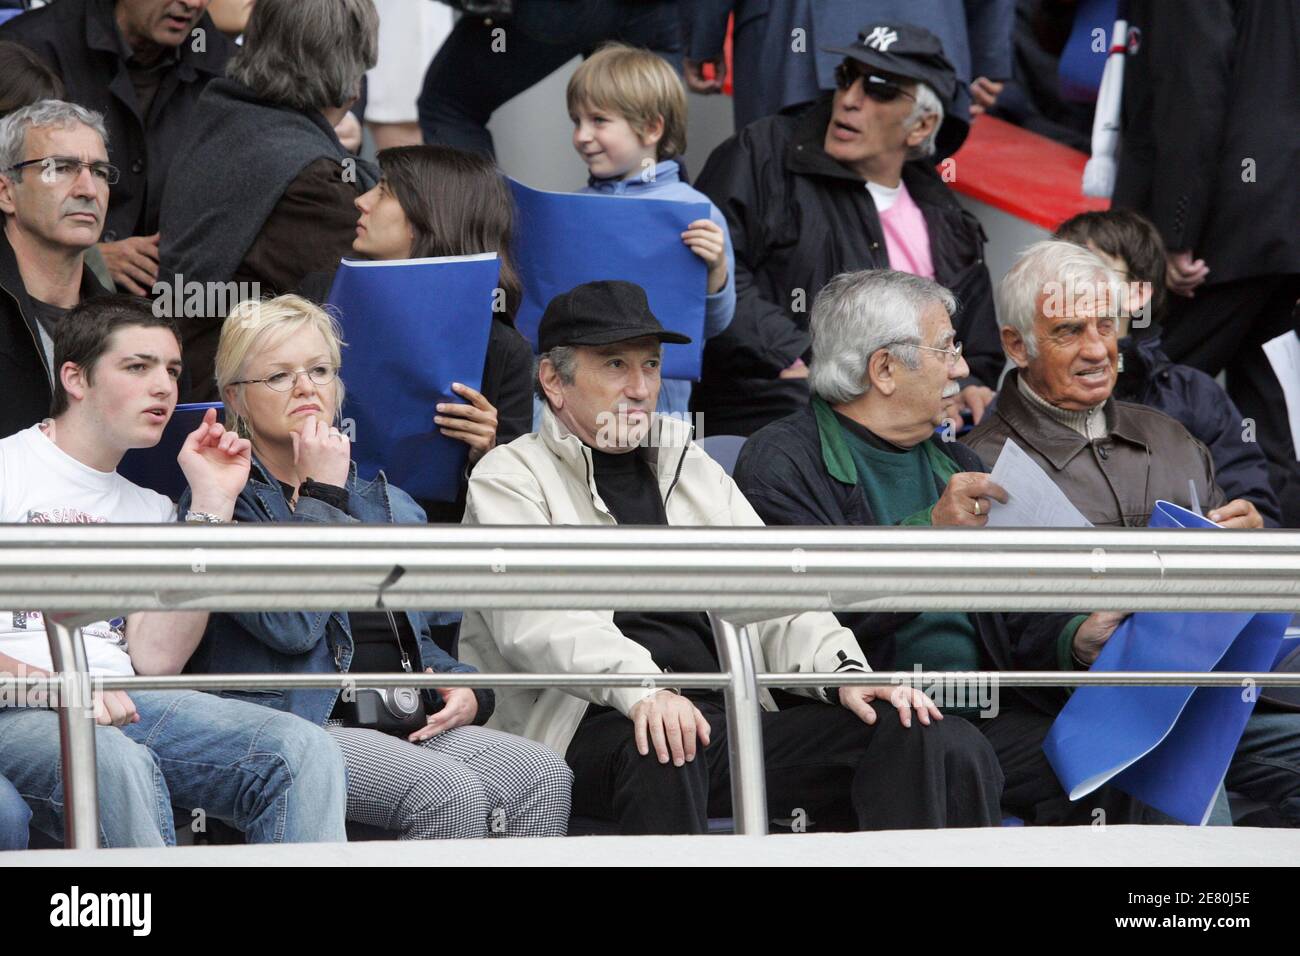 Raymond Domenech, Estelle Denis, French actor Gerard Darmon, TV presenter Michel Drucker and Jean-Paul Belmondo during the French Championship , PSG vs Olympic Lyonnais at the Parc des Princes stadium in Paris, France, on May 5, 2007. The game ended in a draw 1-1. Photo by Gouhier-Taamallah/Cameleon/ABACAPRESS.COM Stock Photo